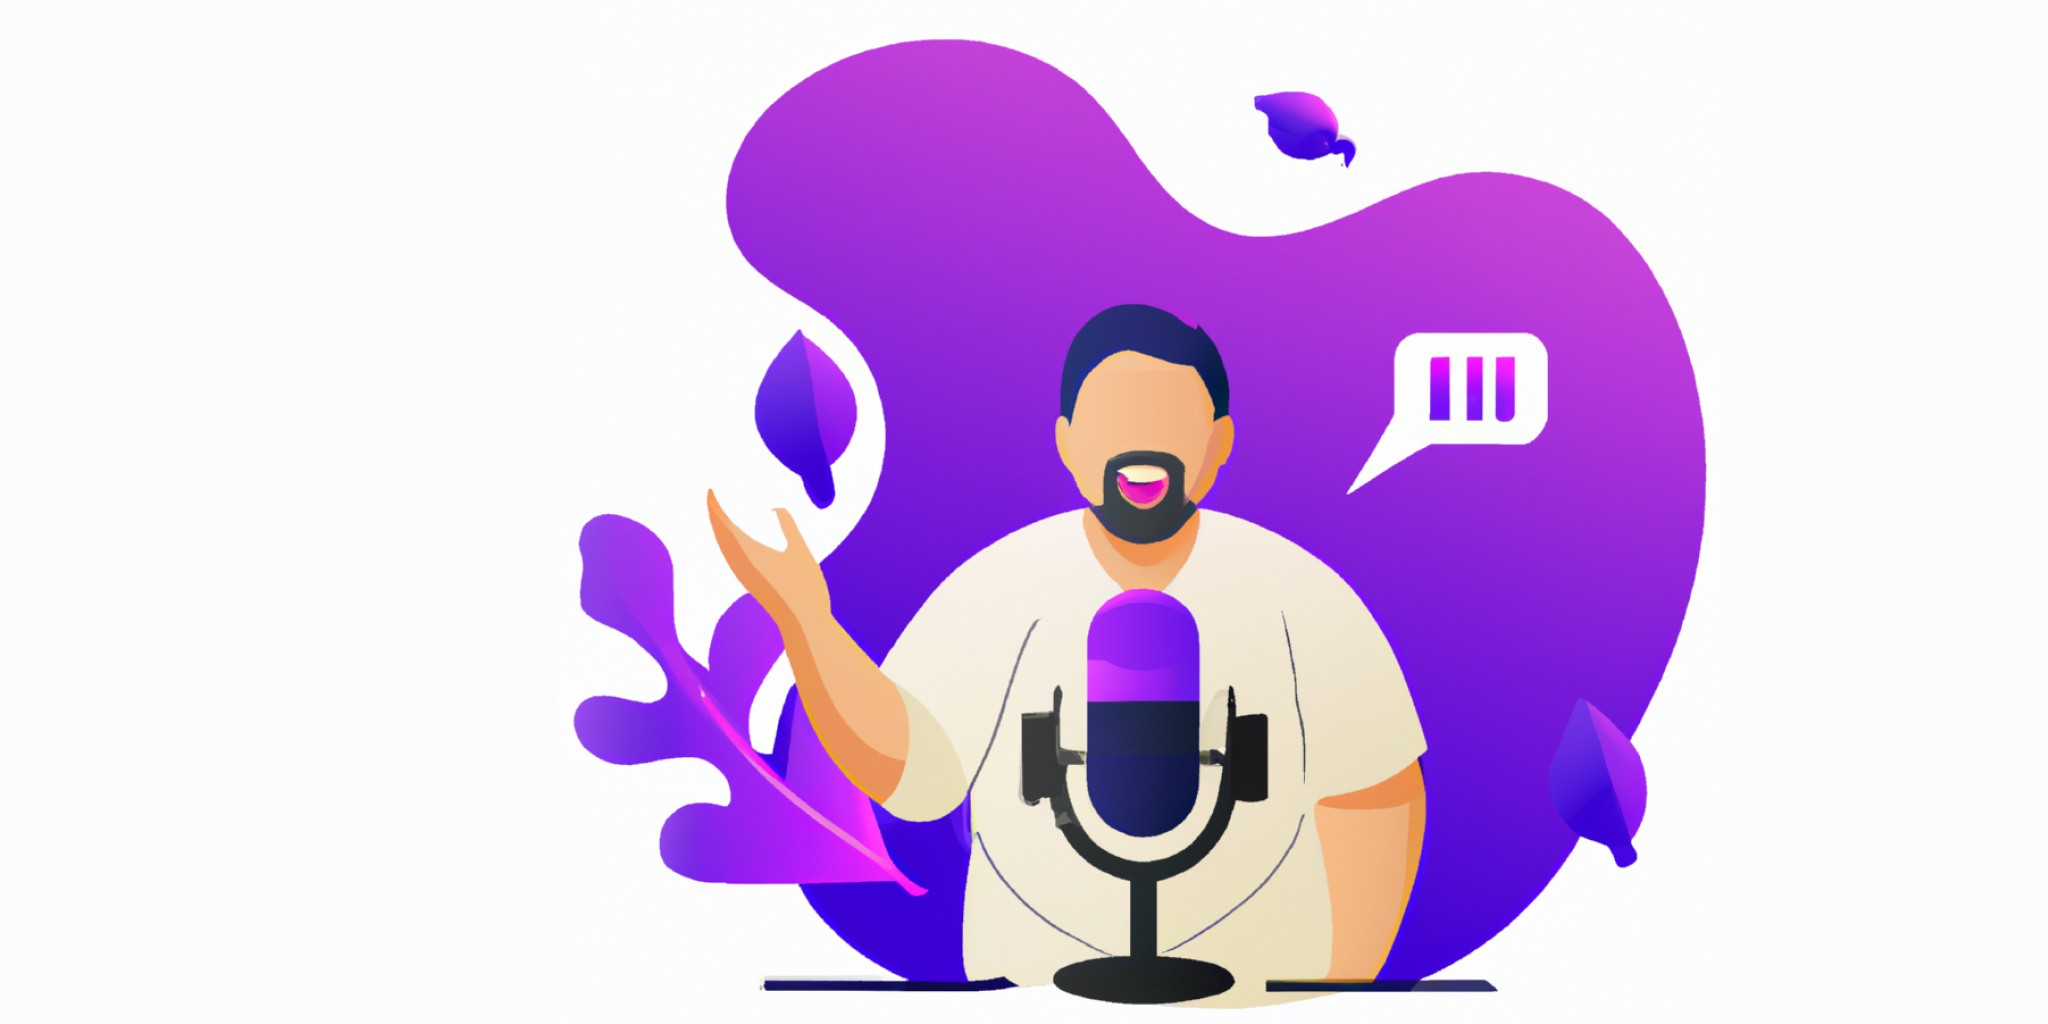 podcast with a person next to it in flat illustration style with gradients and white background